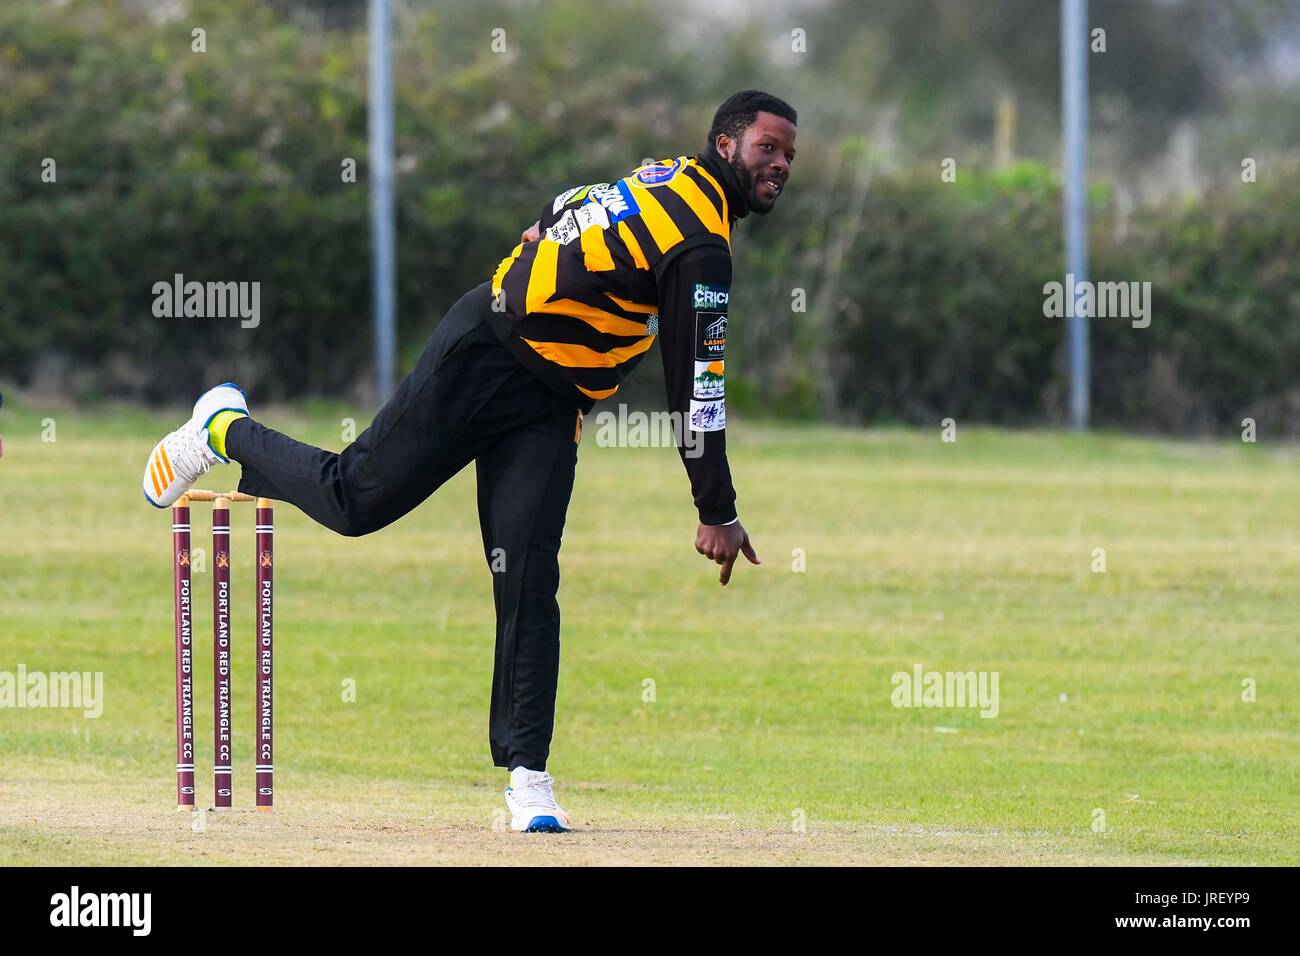 Easton, Portland, Dorset, UK.  4th August 2017.  West Indies Kirk Edwards bowling during the Portland Red Triangle match v Lashings All Stars at the Reforne cricket ground at Easton in Dorset.  Photo Credit: Graham Hunt/Alamy Live News Stock Photo